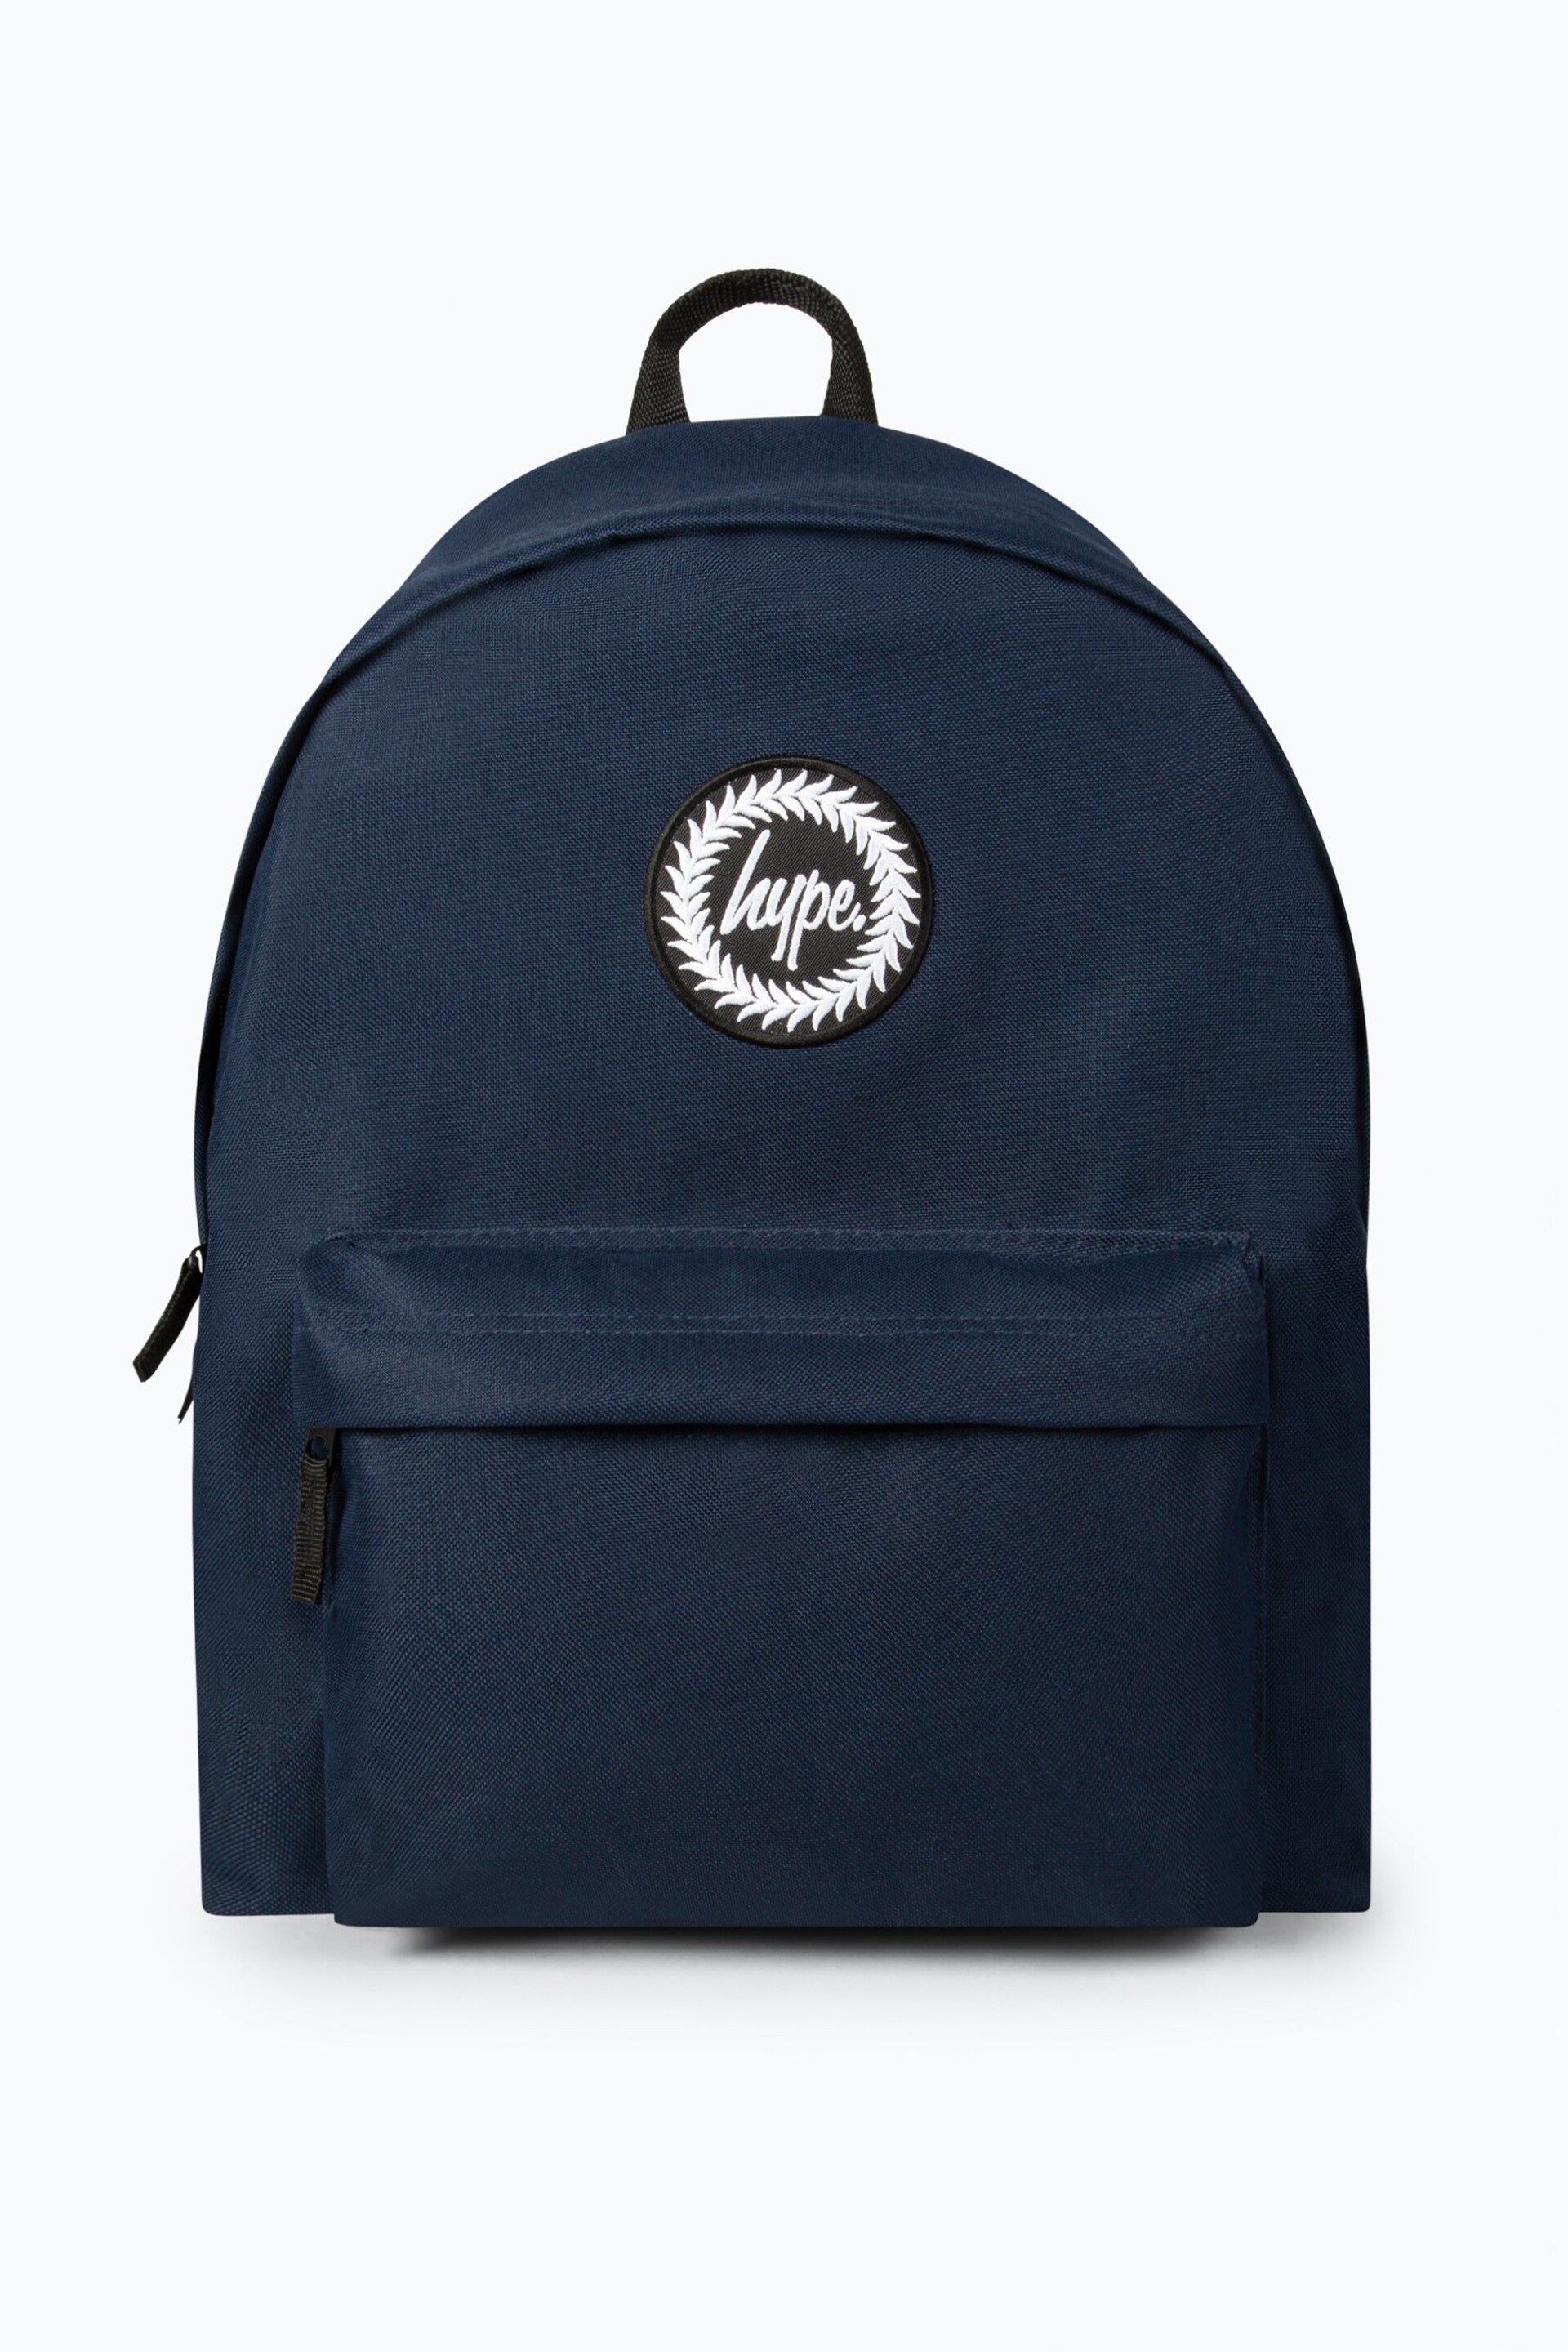 Hype. Iconic Backpack - Image 1 of 5